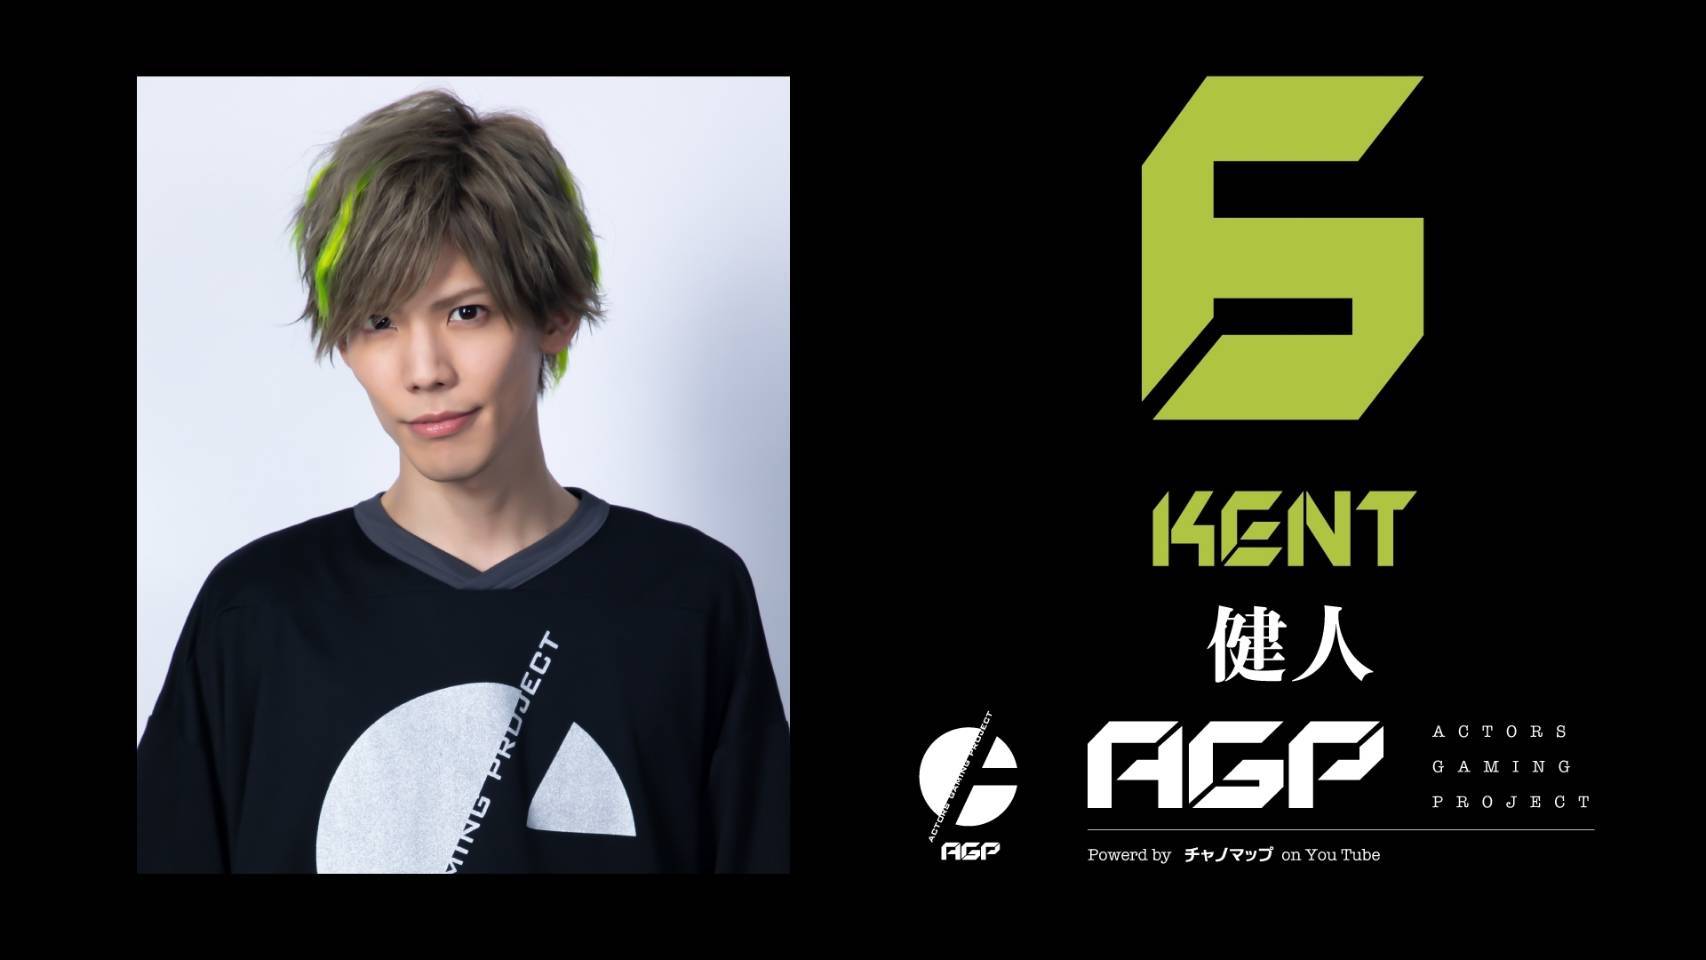 「ACTORS GAMING PROJECT」 6 健人